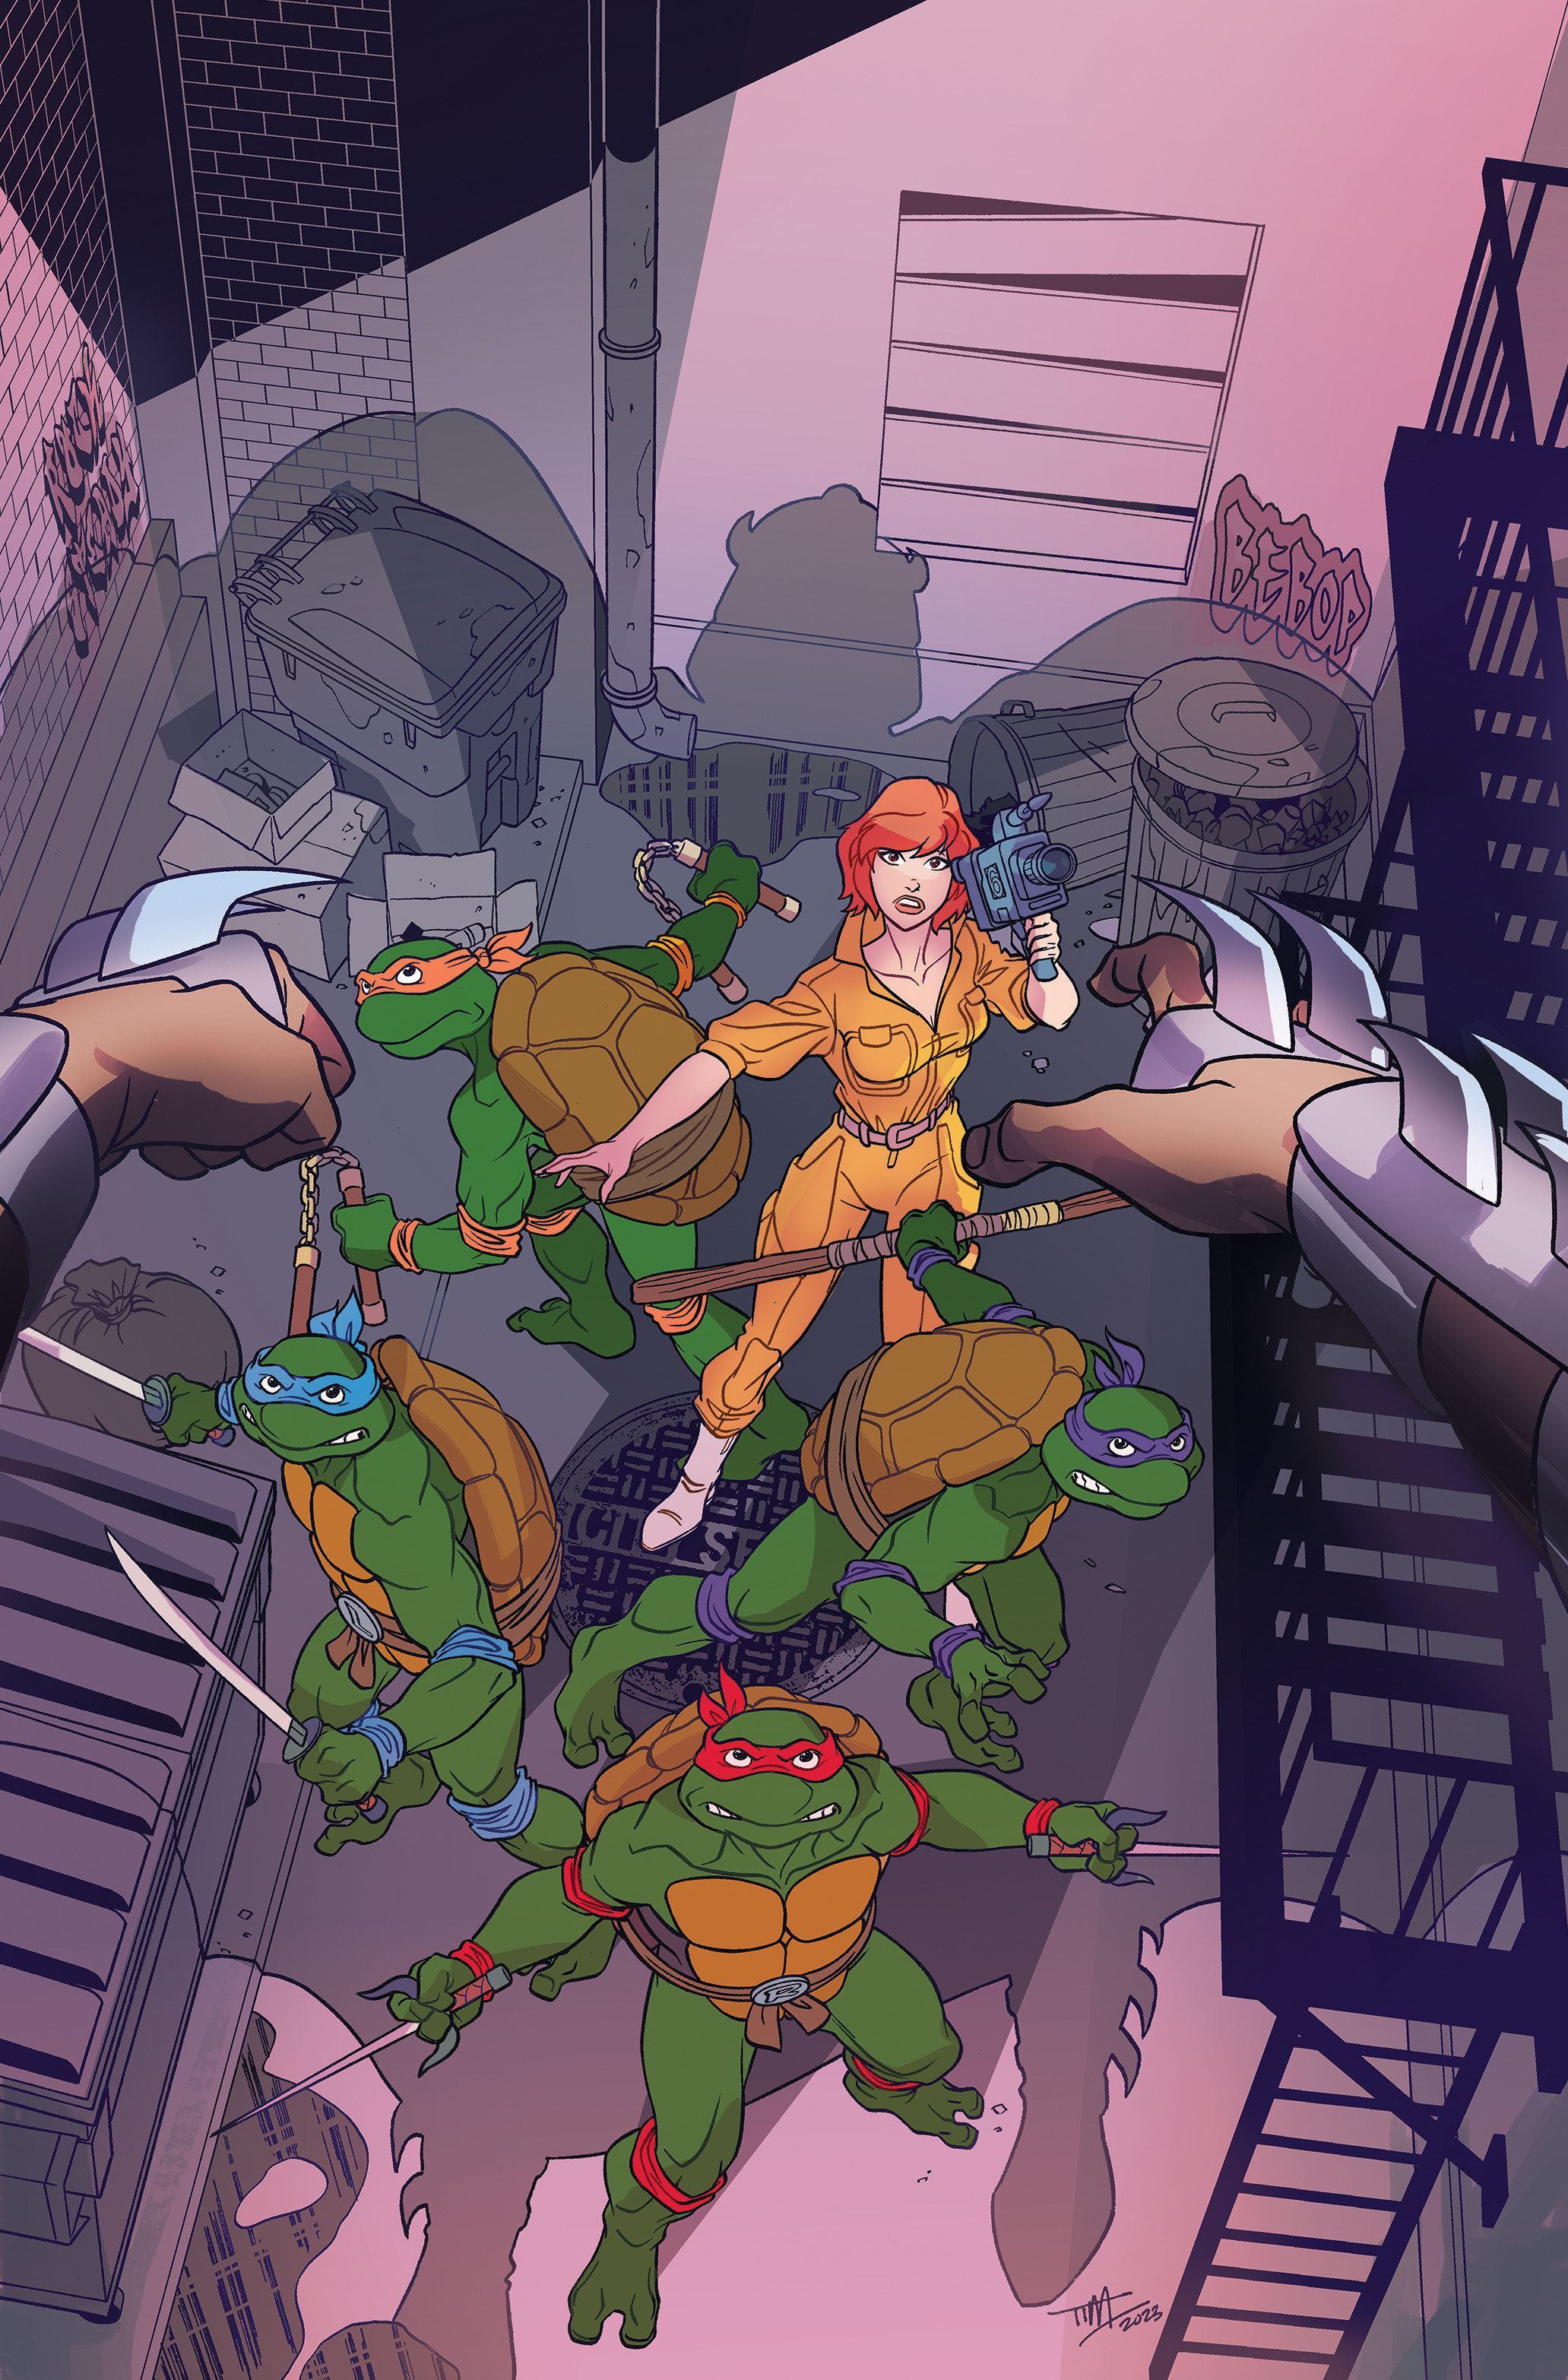 Teenage Mutant Ninja Turtles Saturday Morning Adventures Continued! #9 Cover Levins 1 for 25 Incentive